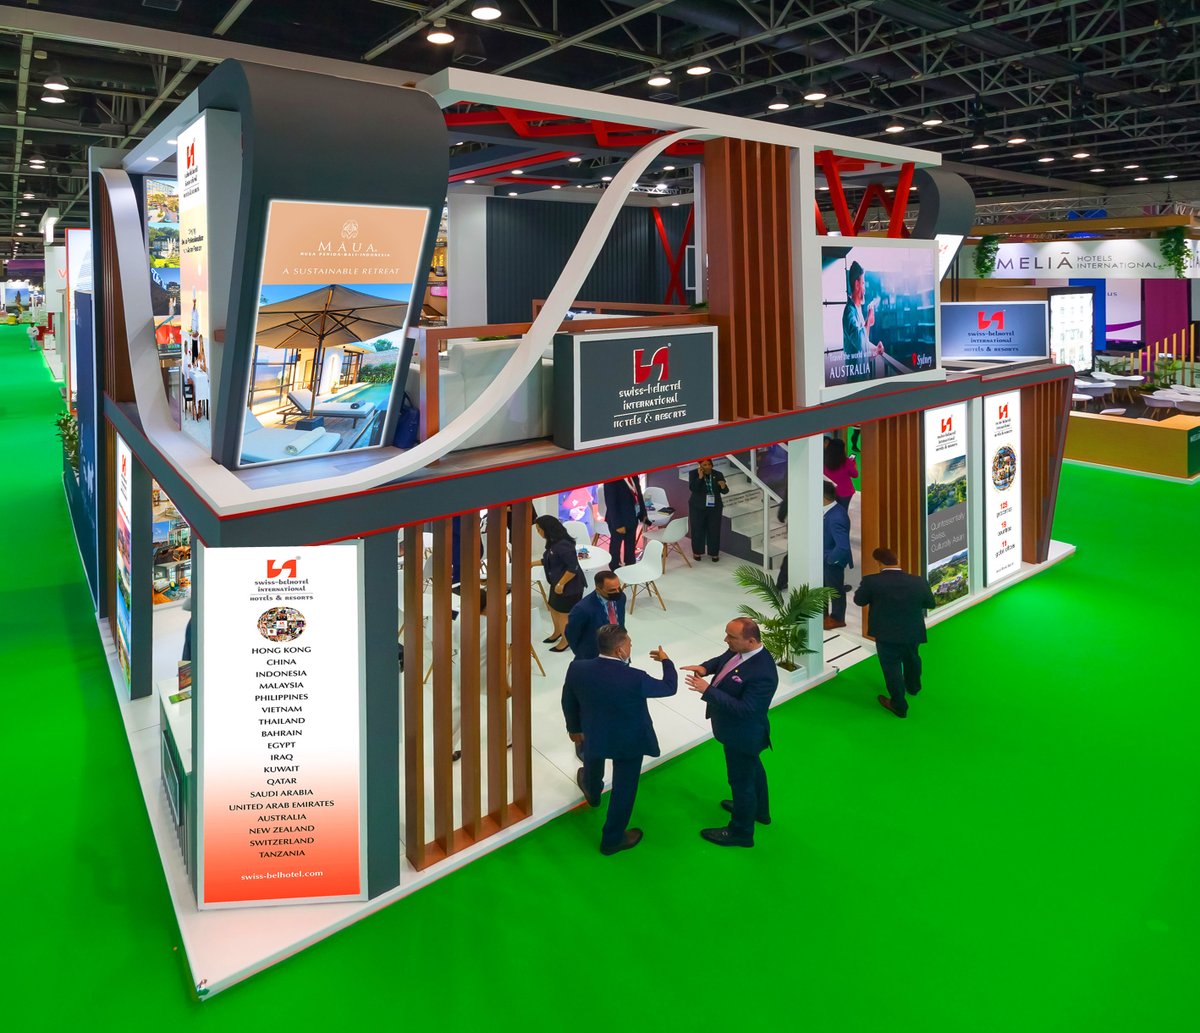 We are proud to have built @swissbelhotel 's exhibition stand for ATM 2022 at Dubai World Trade Centre!

#design #travel #events #dubai #video #dwtc #hotels #atmdubai2022 #atmdubai #dubai #3ddesign #render #exhibitions #exhibitionstand #design #design #construction #contractor https://t.co/tB0x3RH5Fv